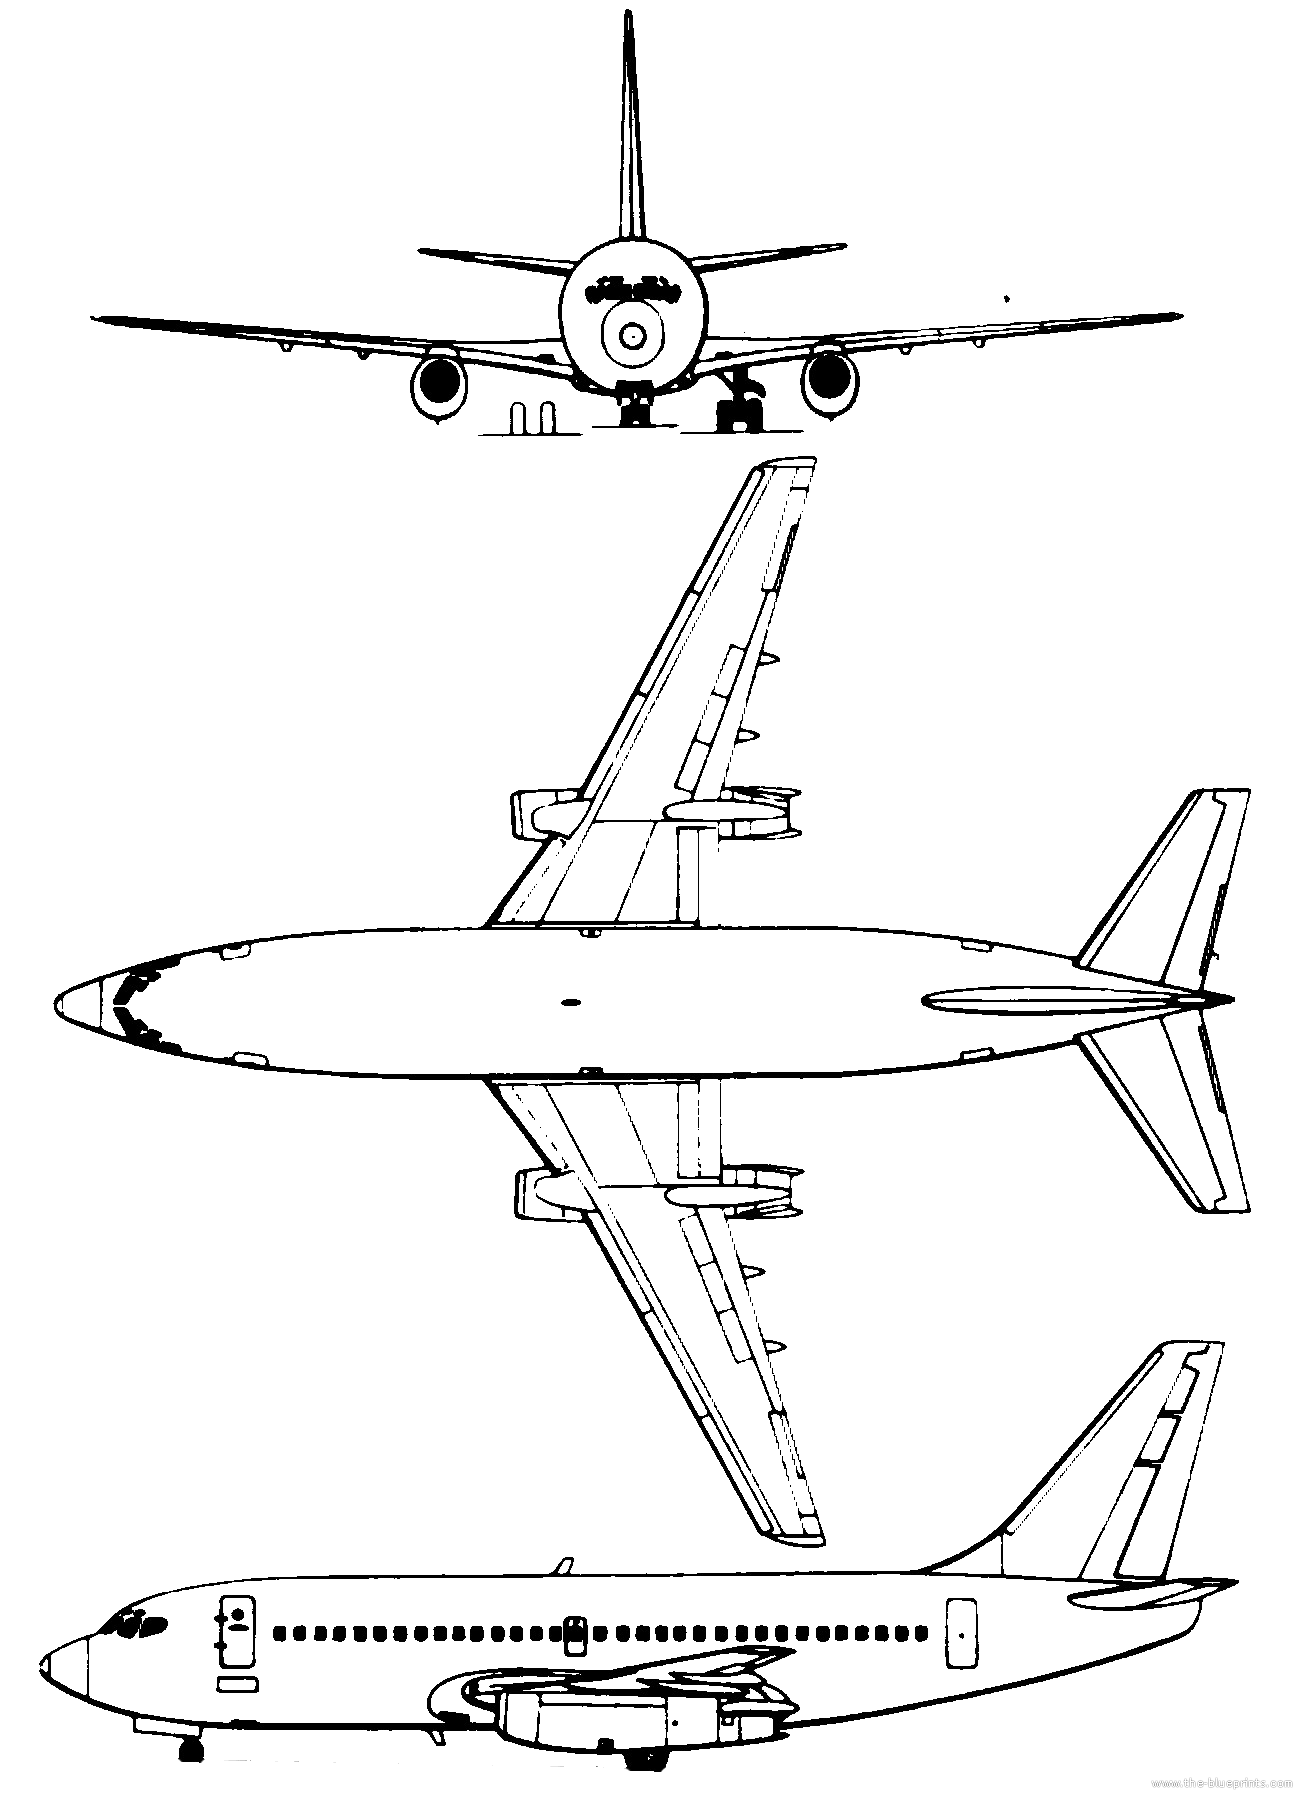 1967 Boeing 737-200 blueprints free - Outlines